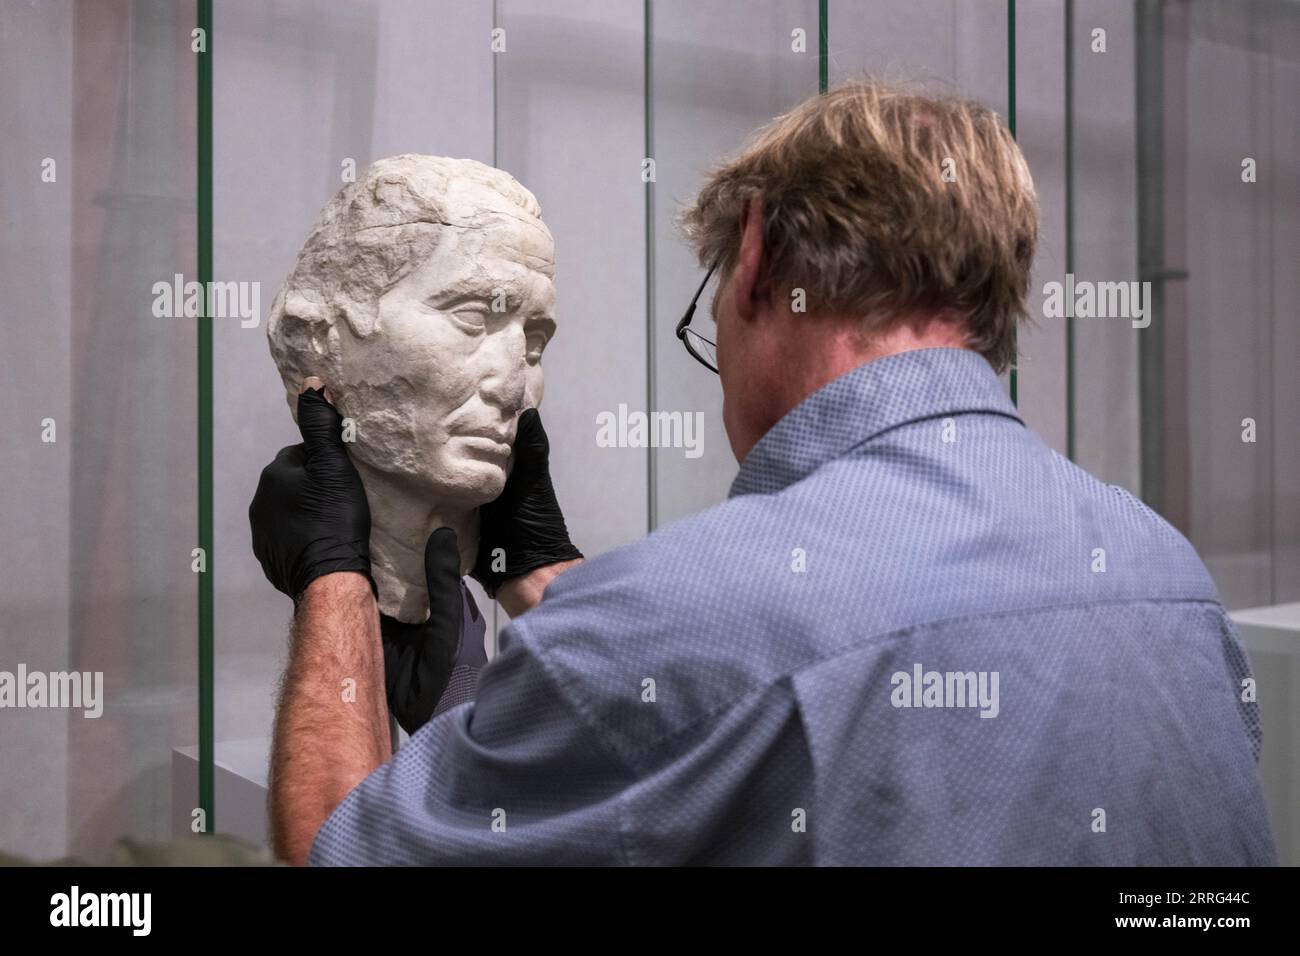 AMSTERDAM - In HART Museum, former Museum Hermitage Amsterdam, the work of art the Bust of Caesar from the Museo Nazionale Romano is unpacked. The artwork is one of the highlights from the first exhibition that the museum will show under the new name. ANP EVERT ELZINGA netherlands out - belgium out Stock Photo